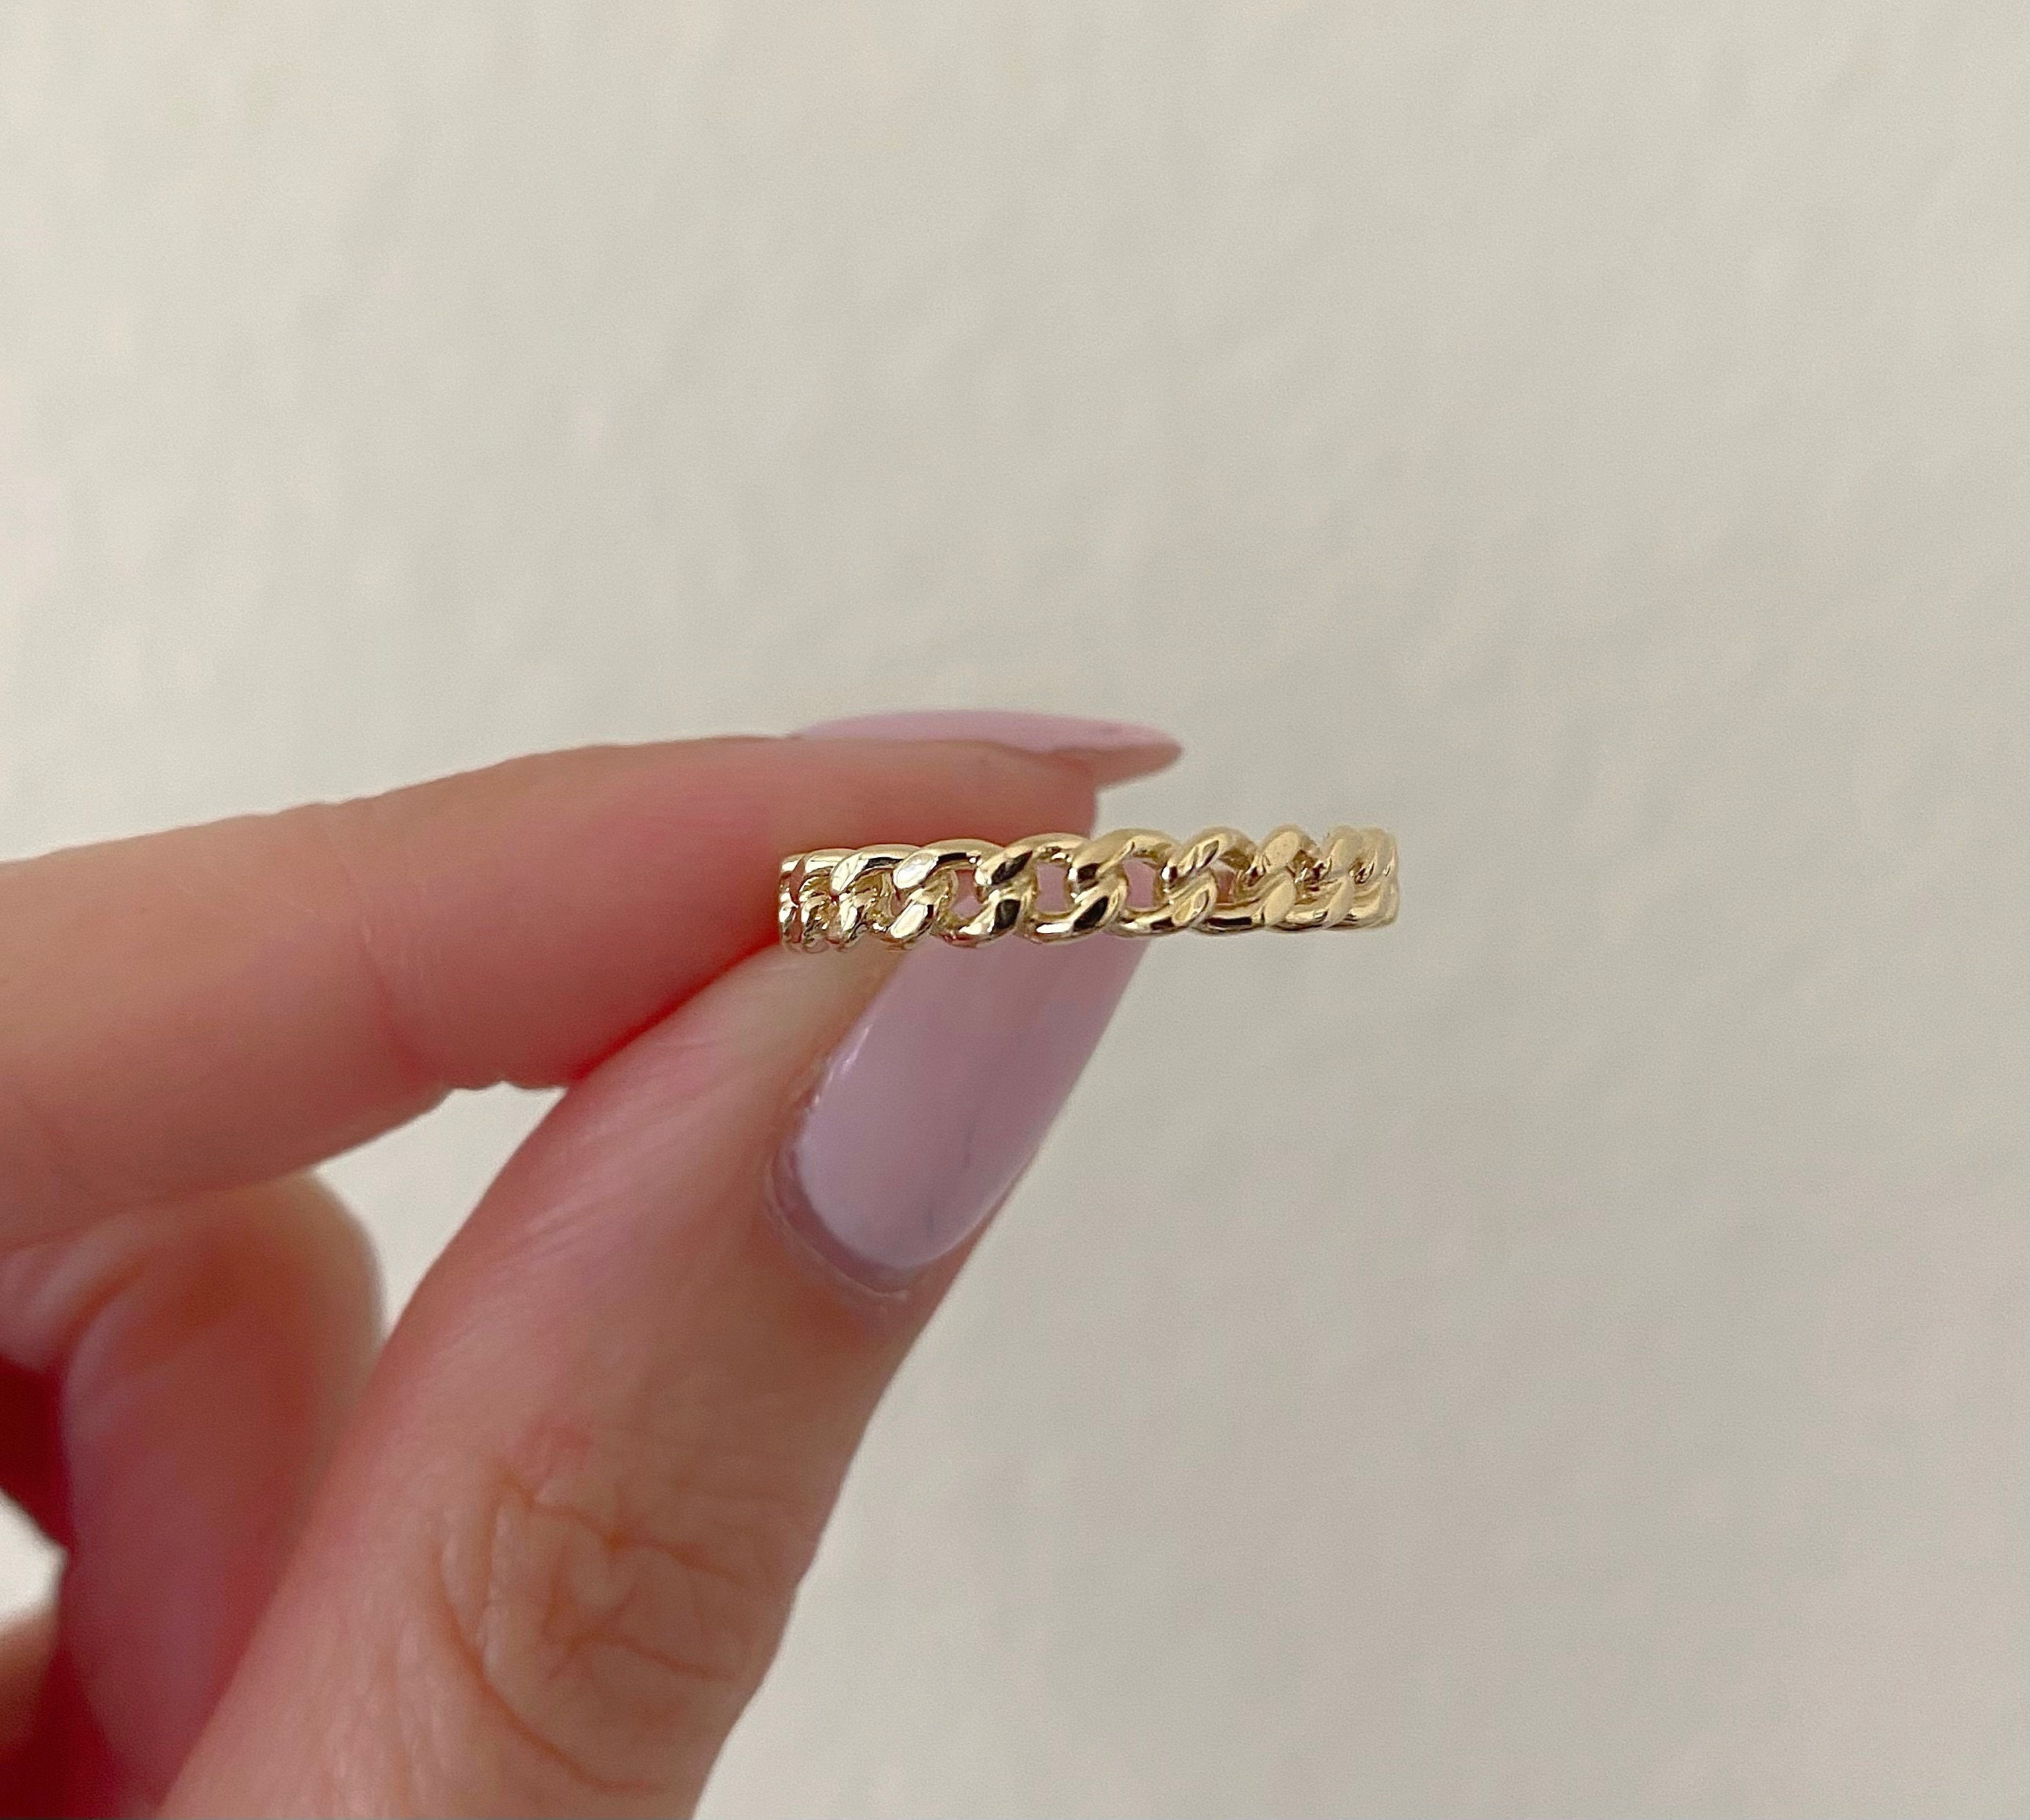 14K Gold Chain Ring, Baguette Cz Diamond Band Ring, President Band Style  Unique Chain Ring, Dainty Stacking Ring, Statement Ring